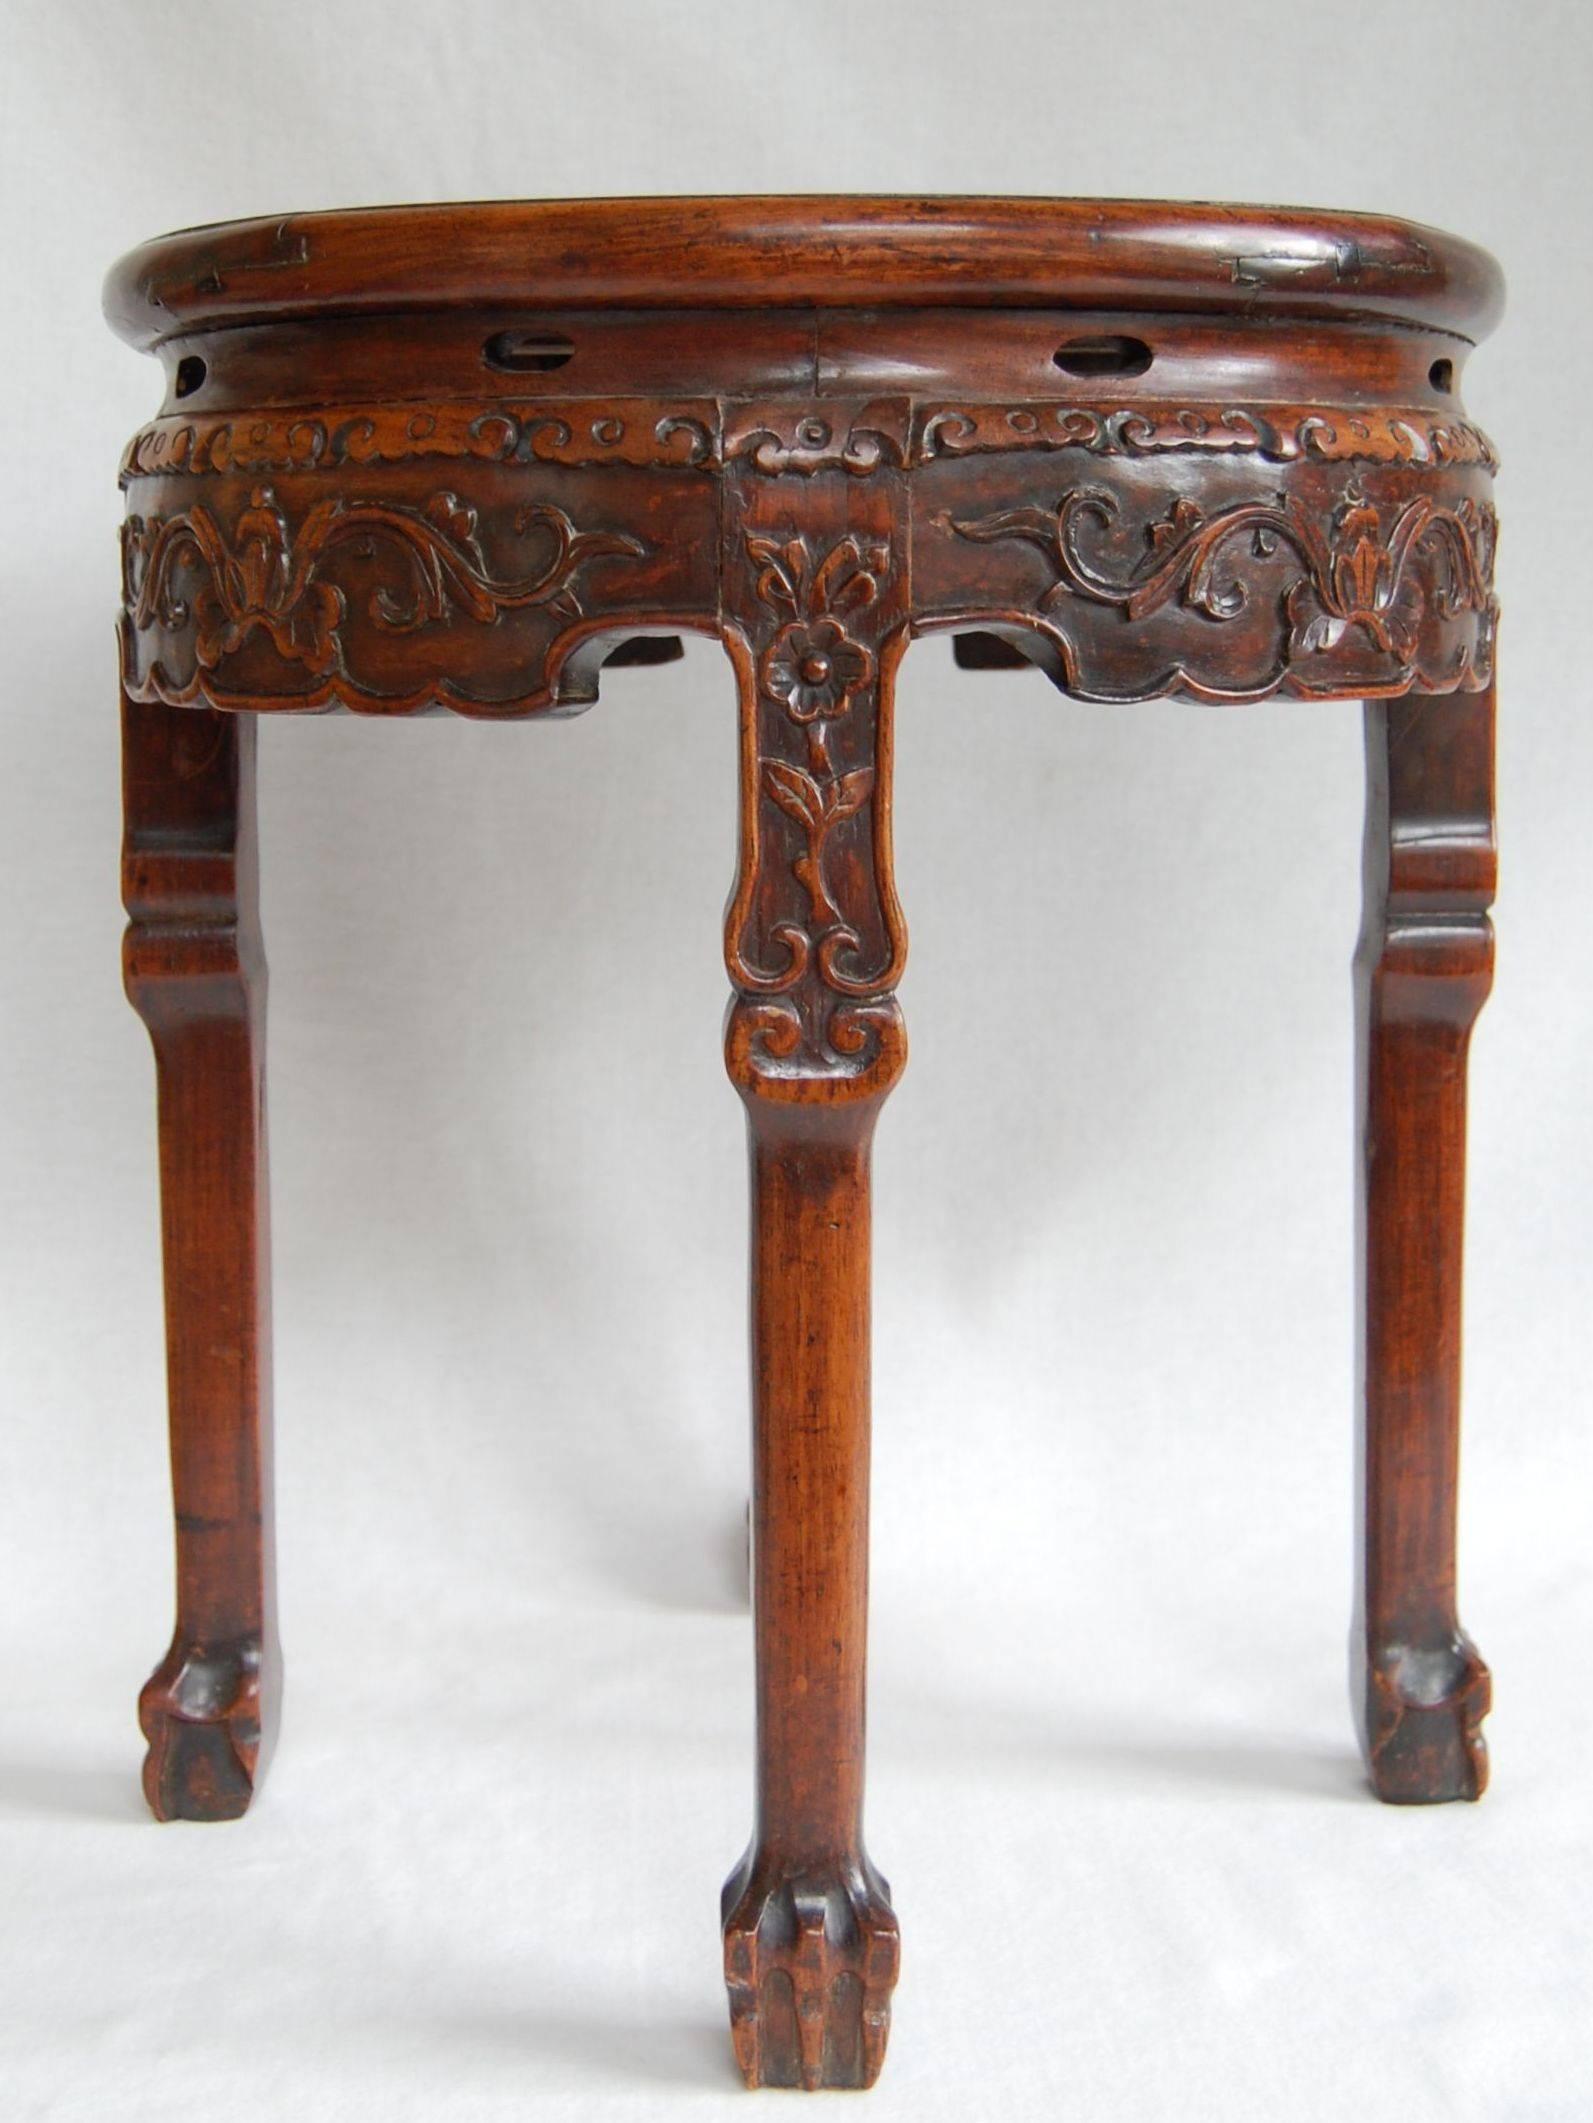 Late 19th century circular Chinese table with marble top. Excellent condition with beautiful color and patina.